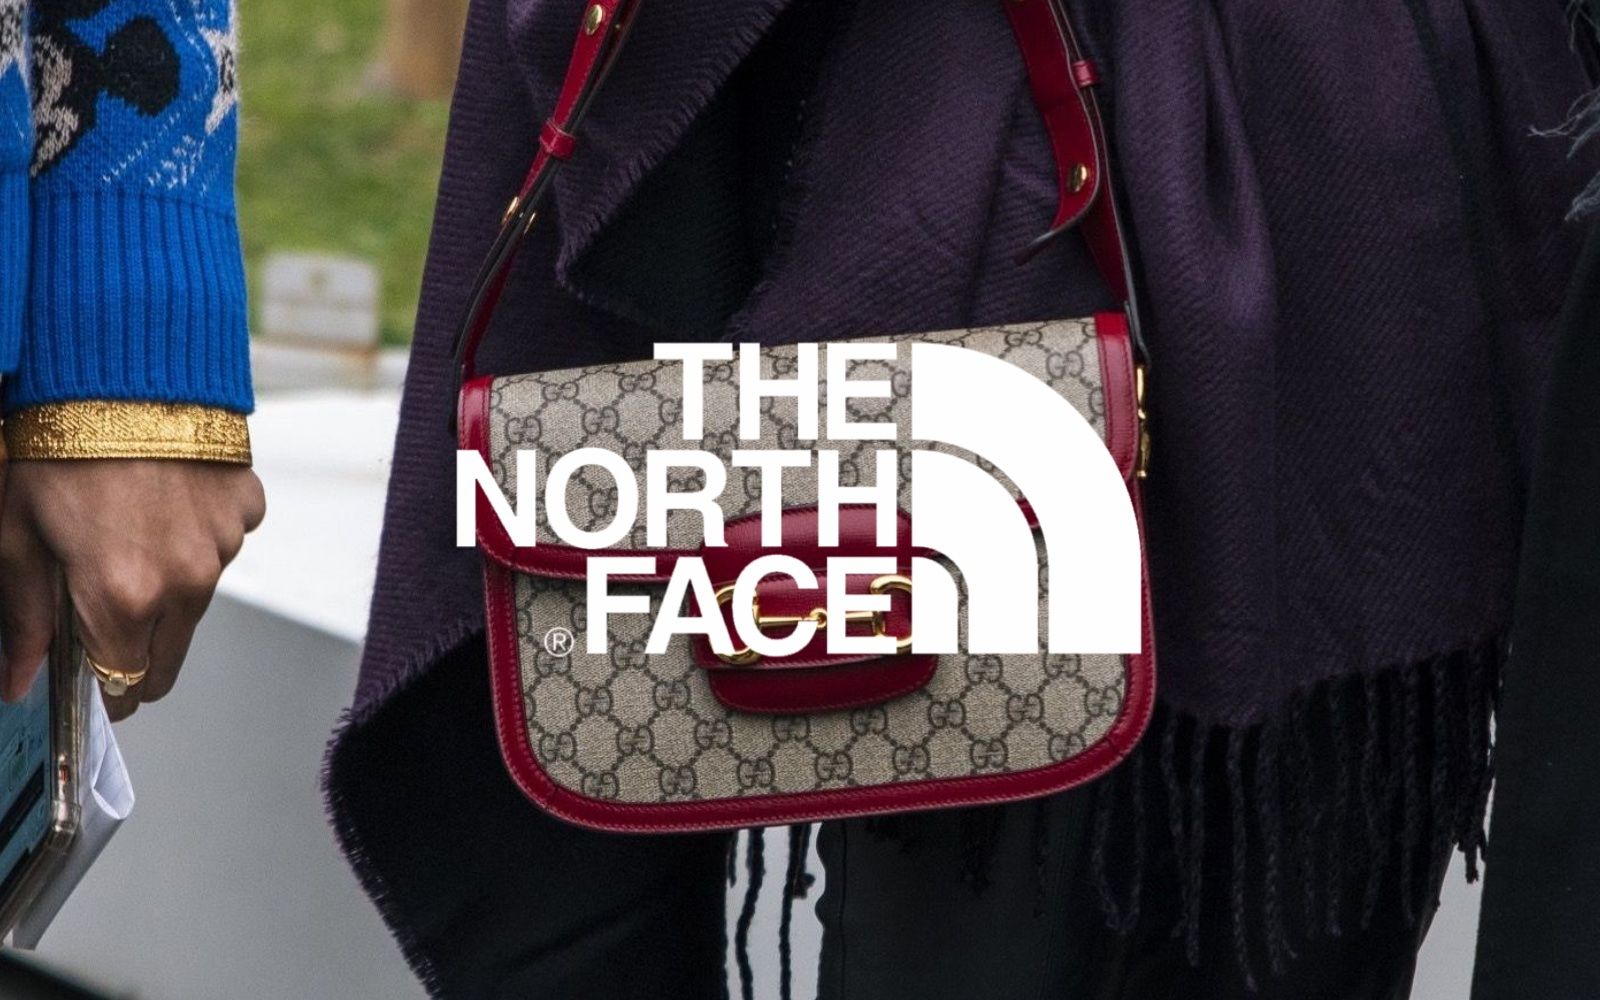 Gucci has announced a collaboration with The North Face